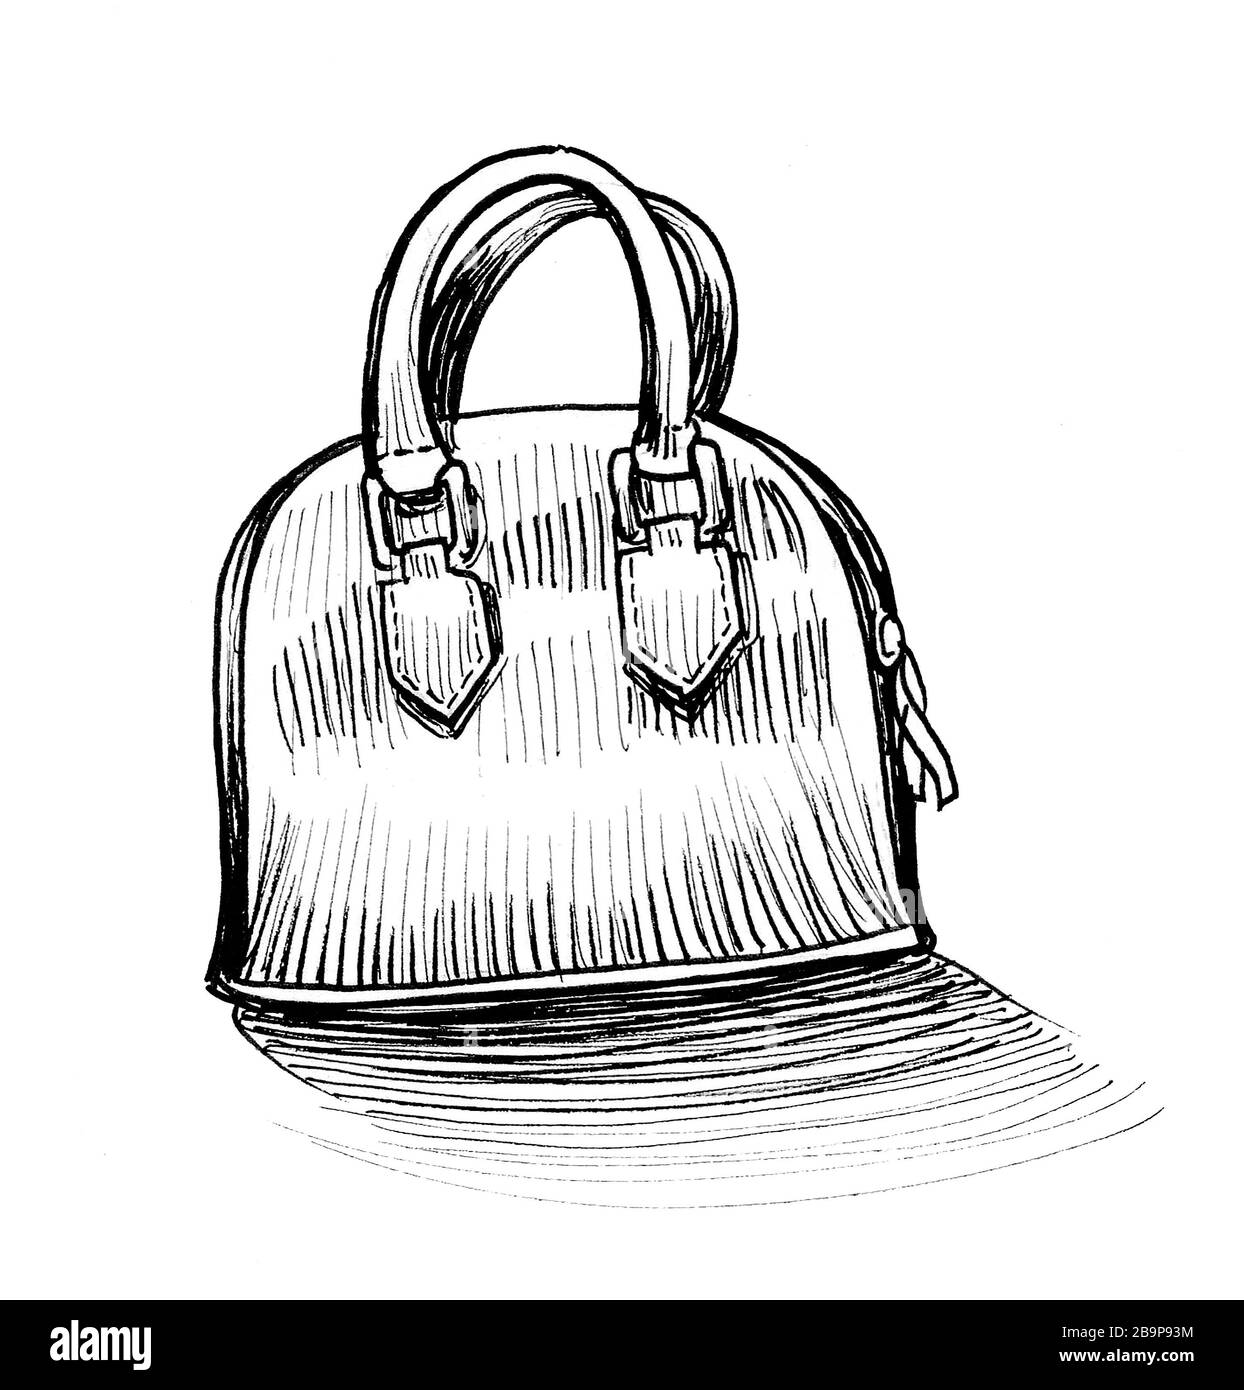 Sketch of a hand holding a ladies bag set posters for the wall  posters  hand handbag doodle  myloviewcom